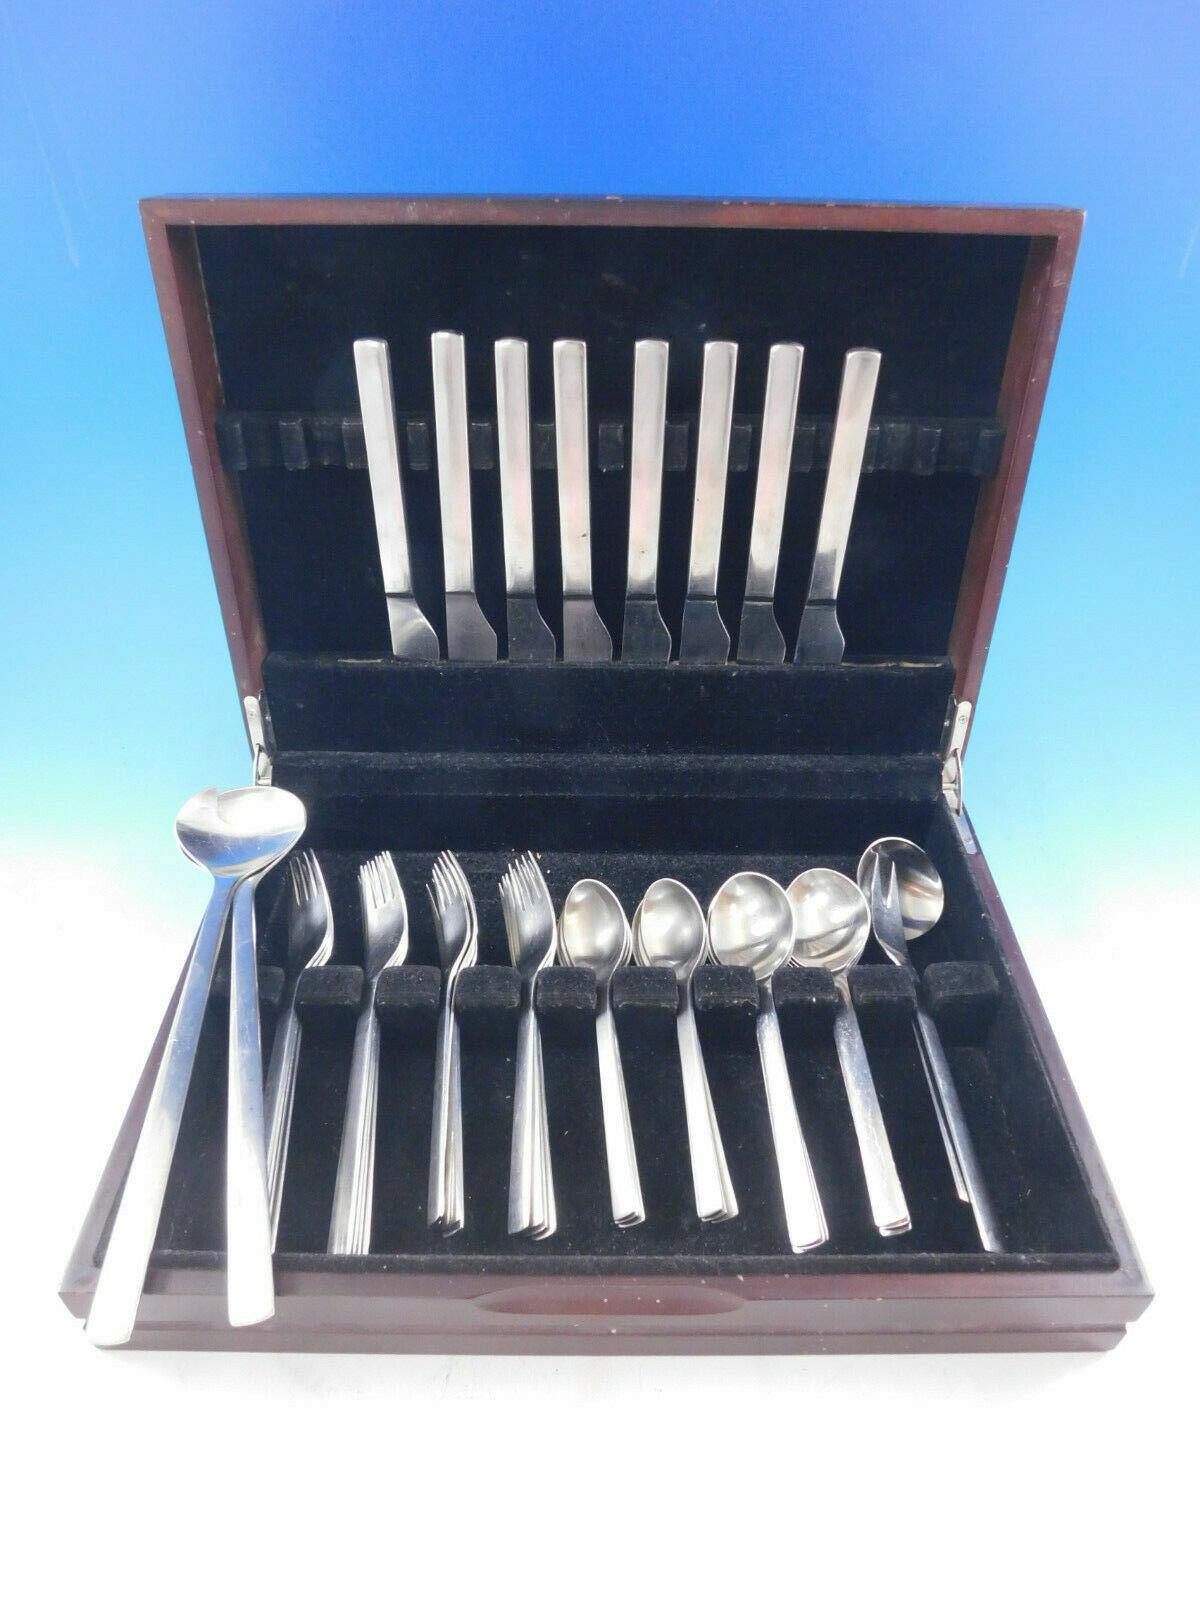 Vintage New York Matte stainless by Georg Jensen, older set made in Denmark.

This 44 piece set includes:

- 8 dinner knives 8-1/4